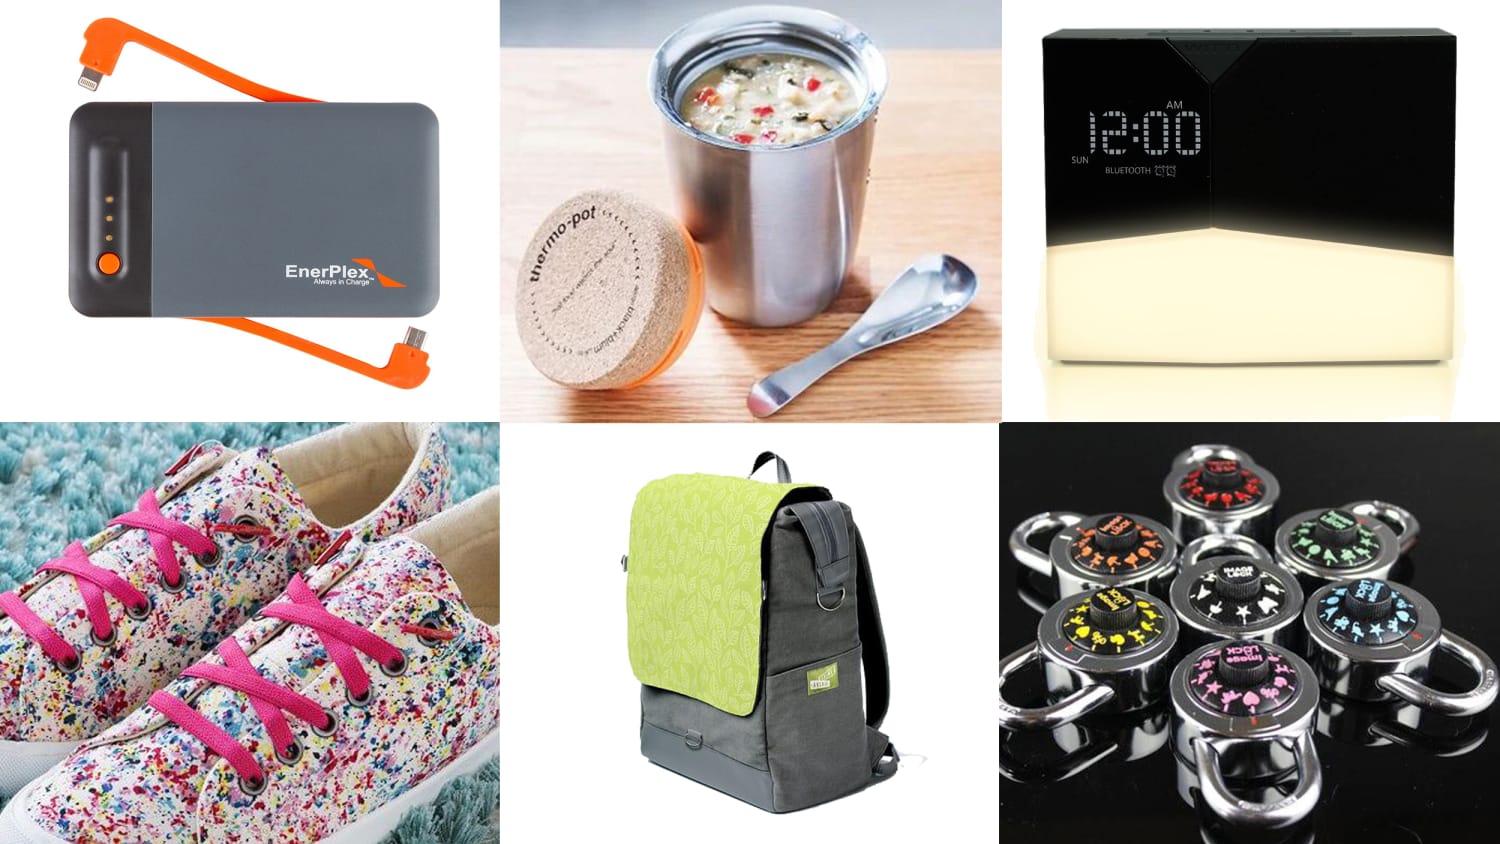 go-to gadgets and gear to fix those back to school daily dilemmas